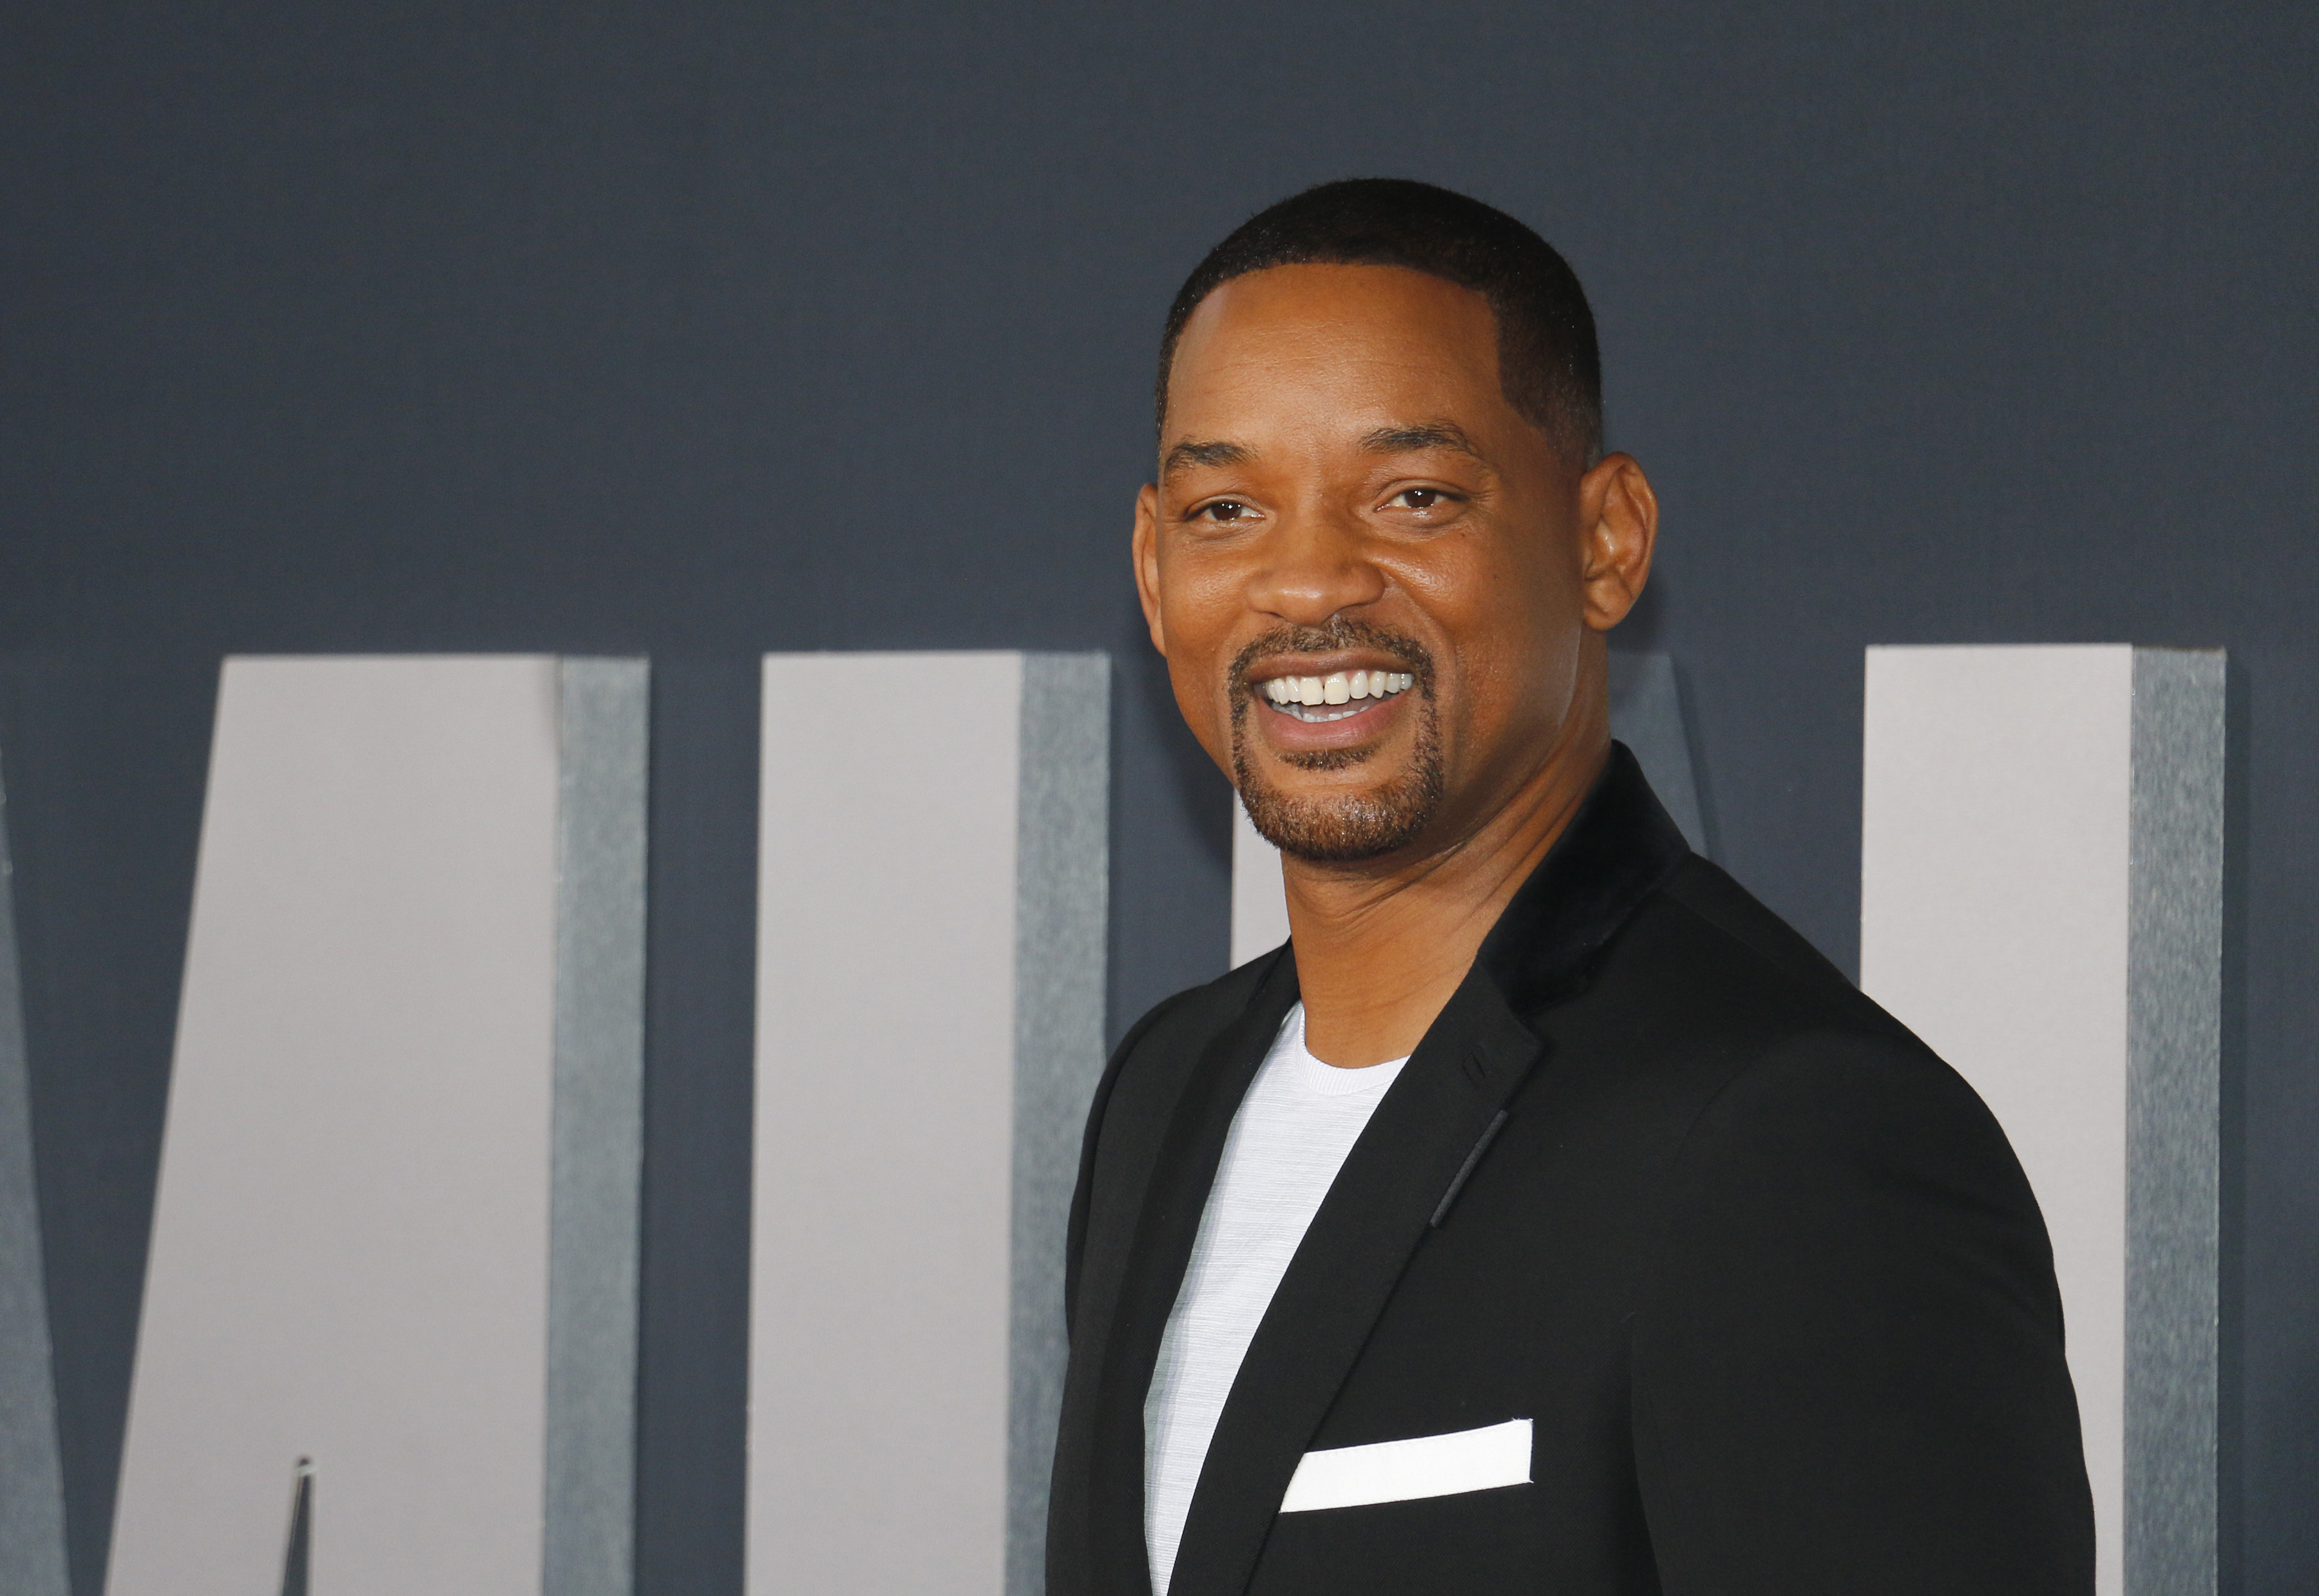 Will Smith Height: How Tall is He? - Hood MWR